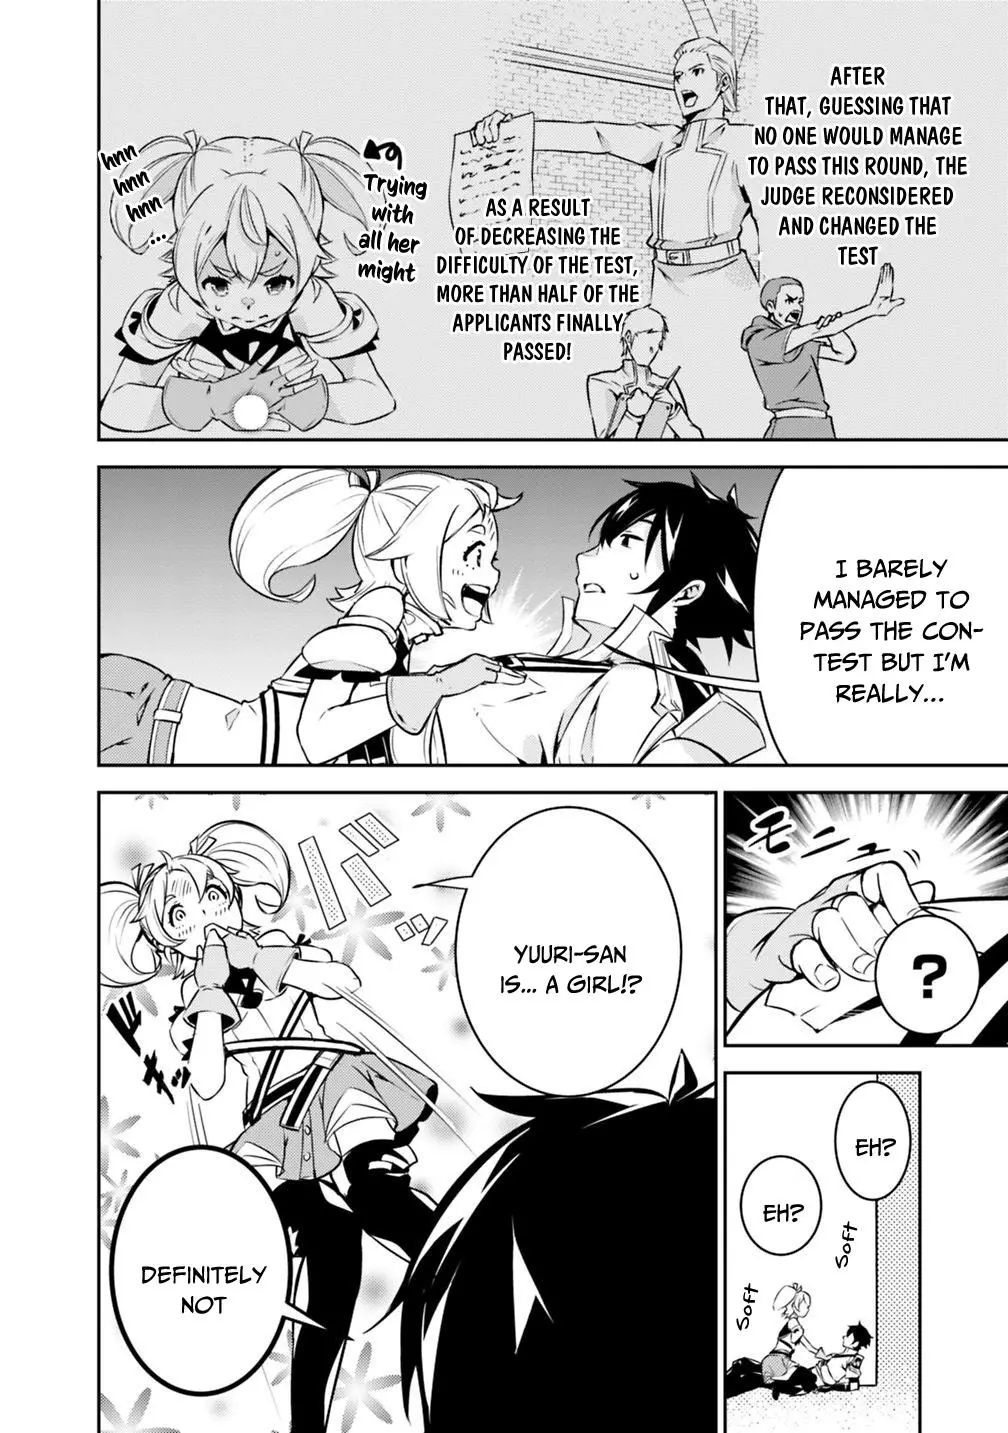 The Strongest Magical Swordsman Ever Reborn As An F-Rank Adventurer. - 10 page 5